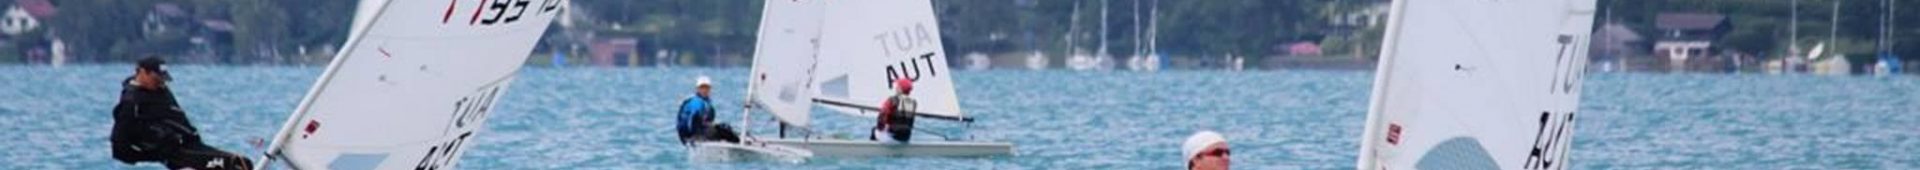 Attersee und Traunsee Cup